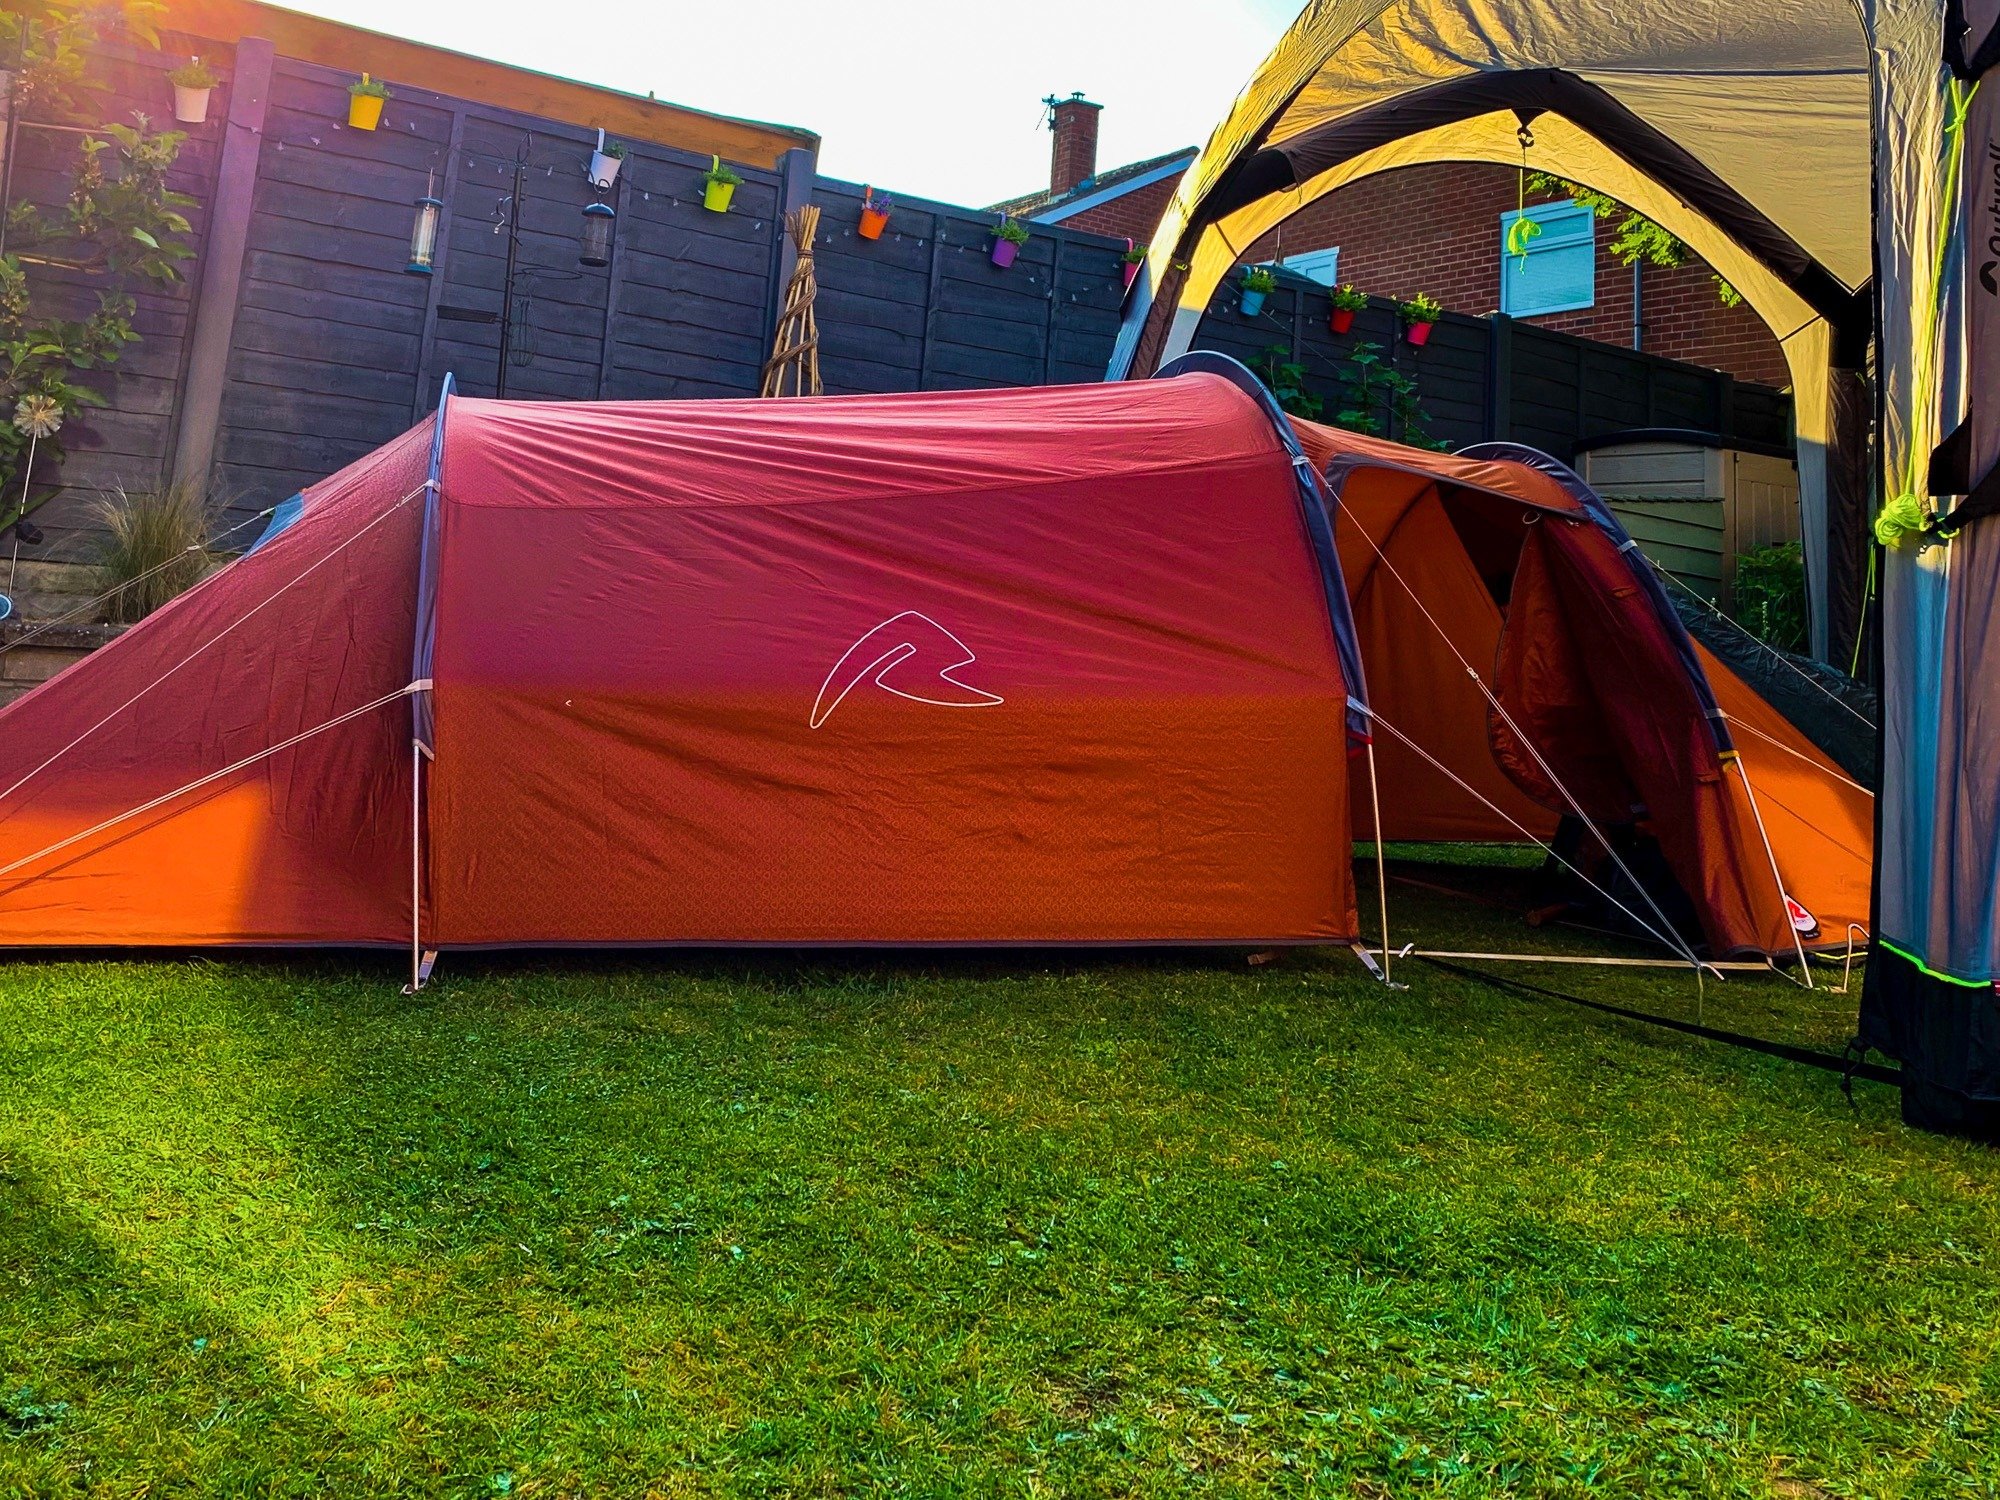 Robens Pioneer 3EX Lightweight Tent | Get Out With The Kids